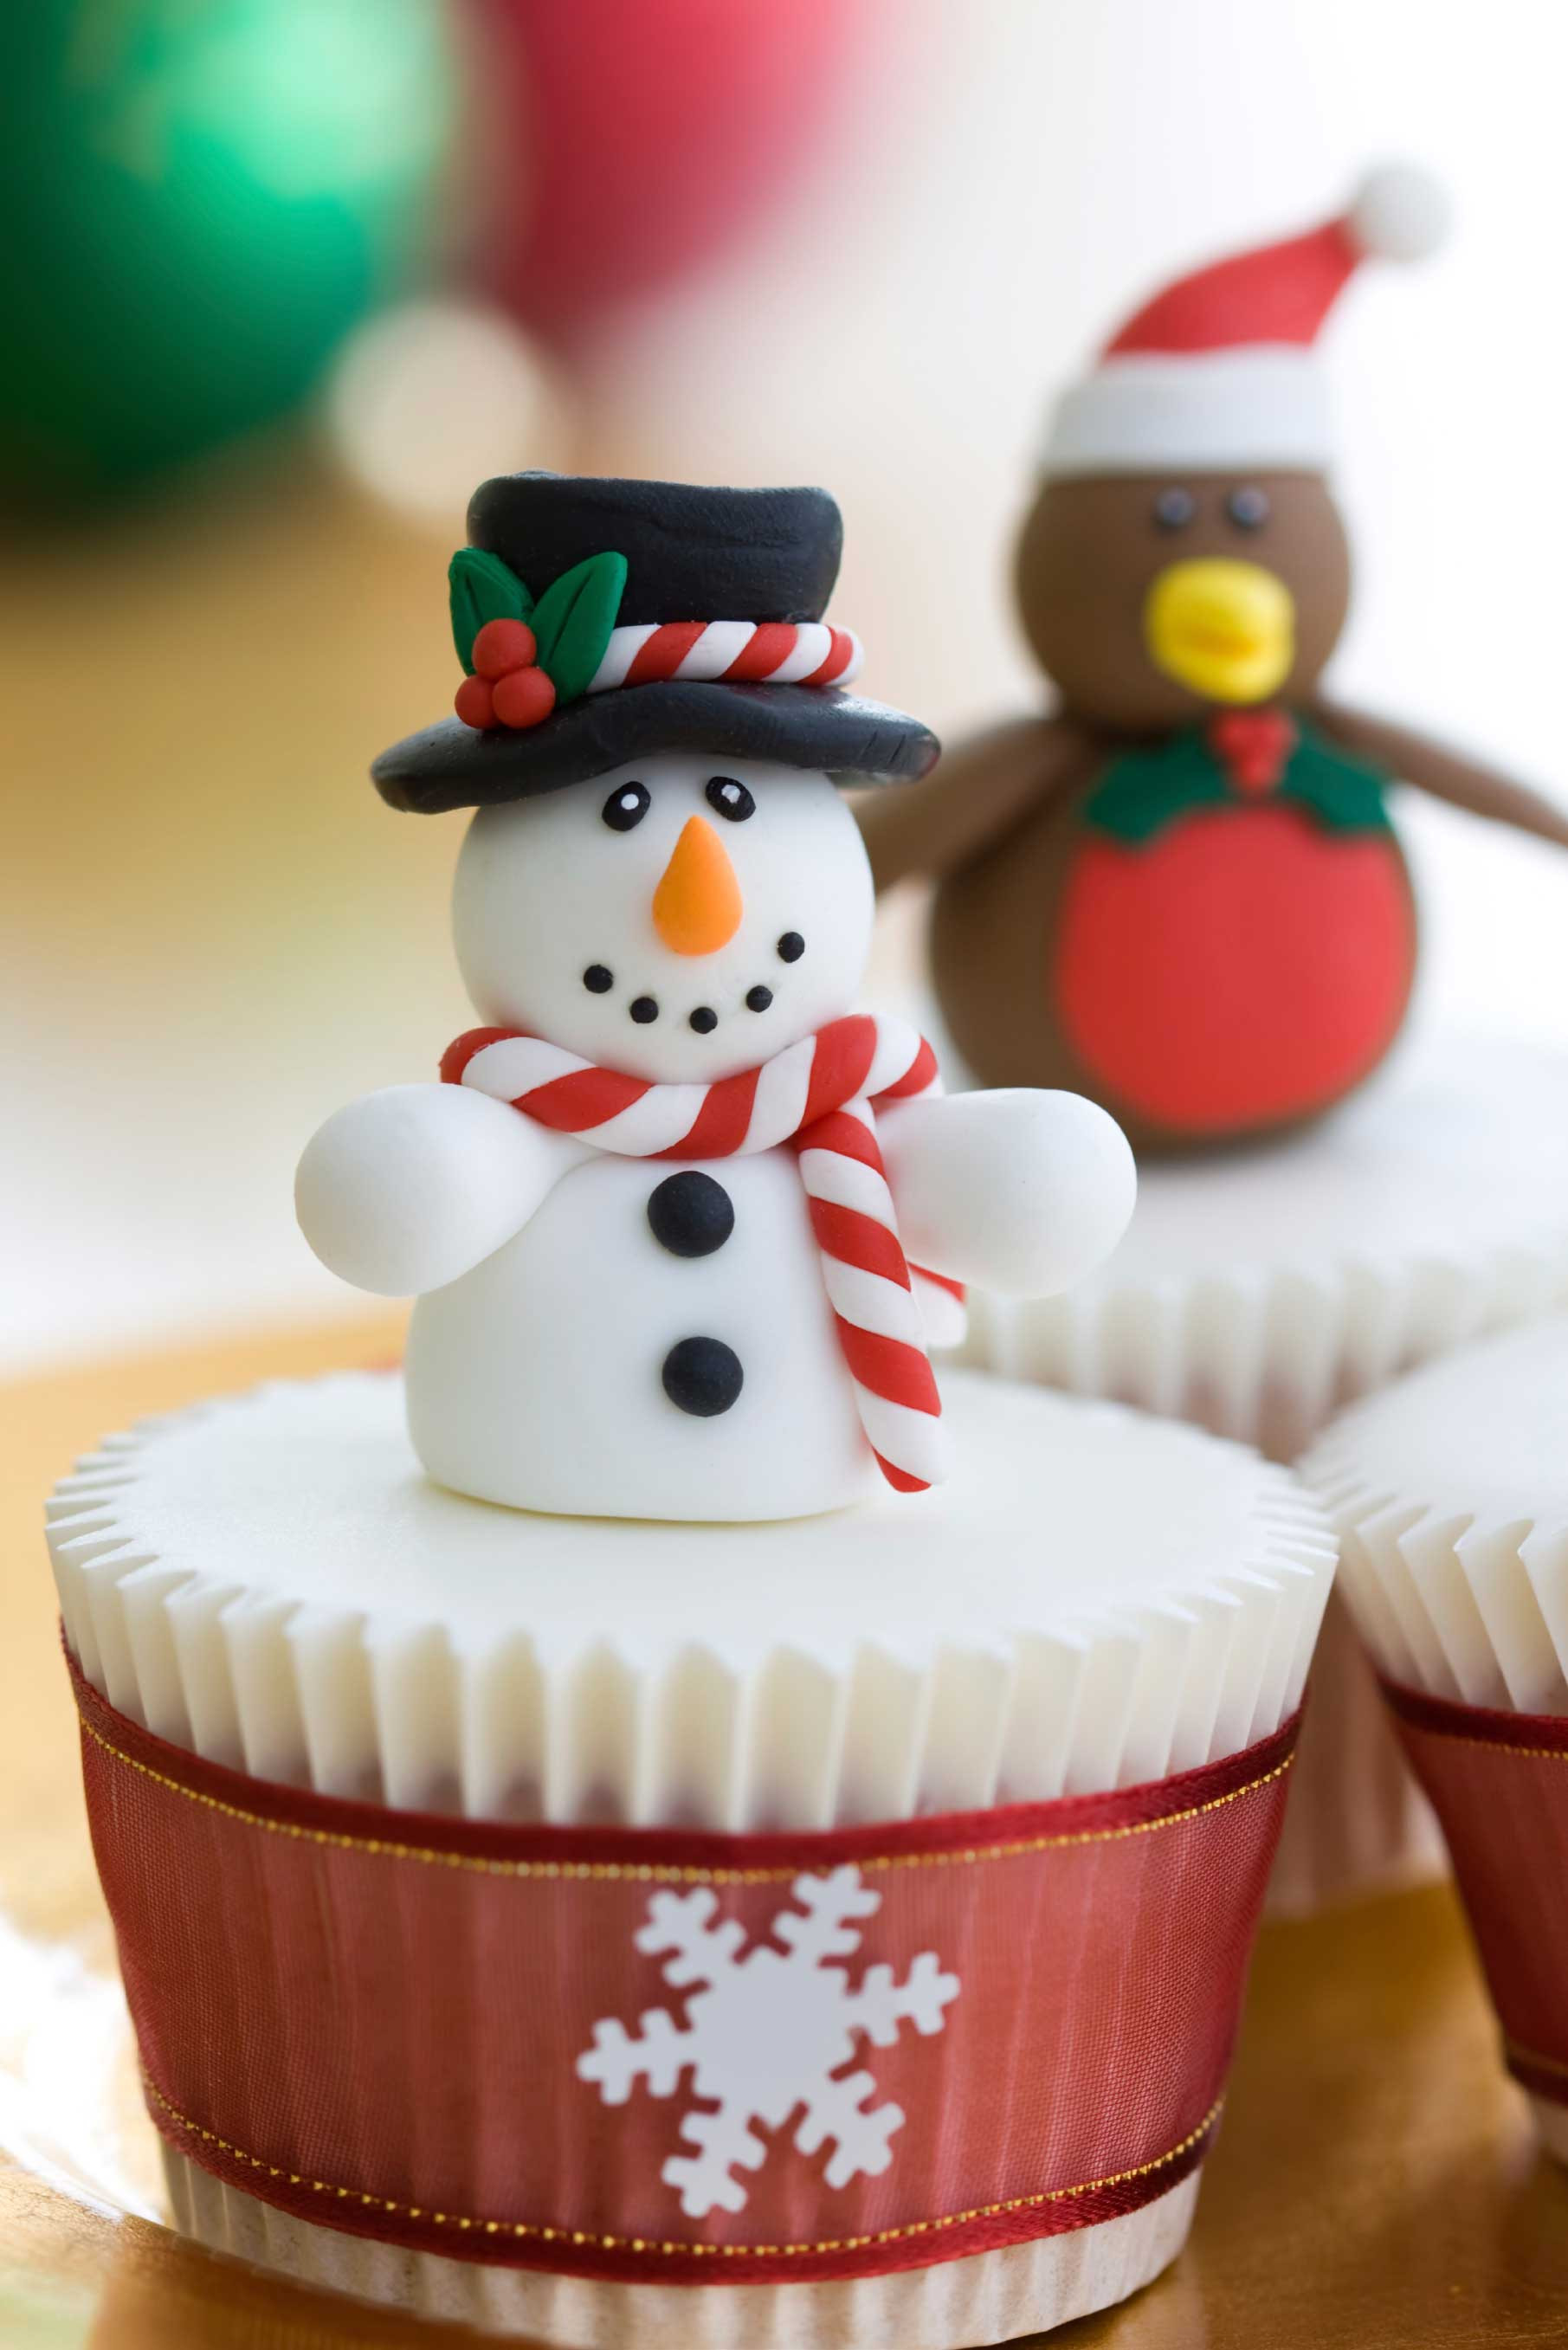 Christmas Cake And Cupcakes
 Christmas Cakes & Baking Gallery Pink Frosting Party Ideas